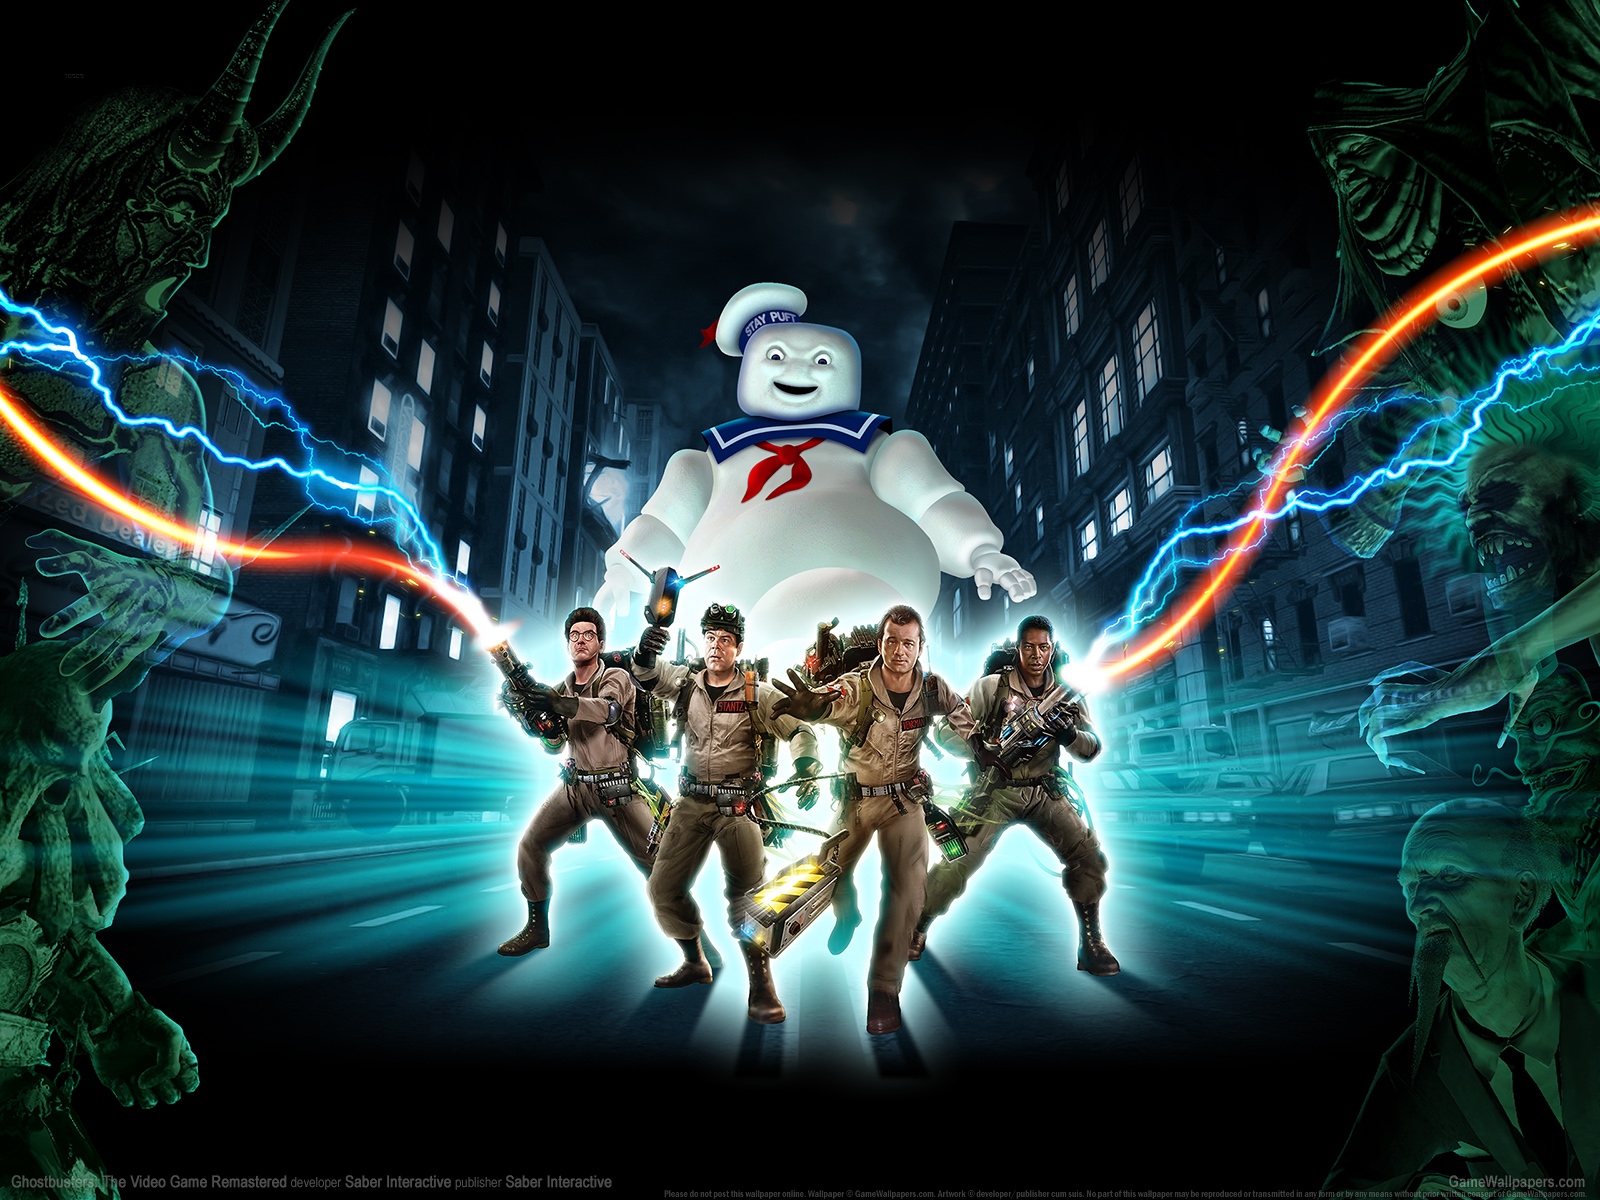 Ghostbusters: The Video Game Remastered 1600 wallpaper or background 01